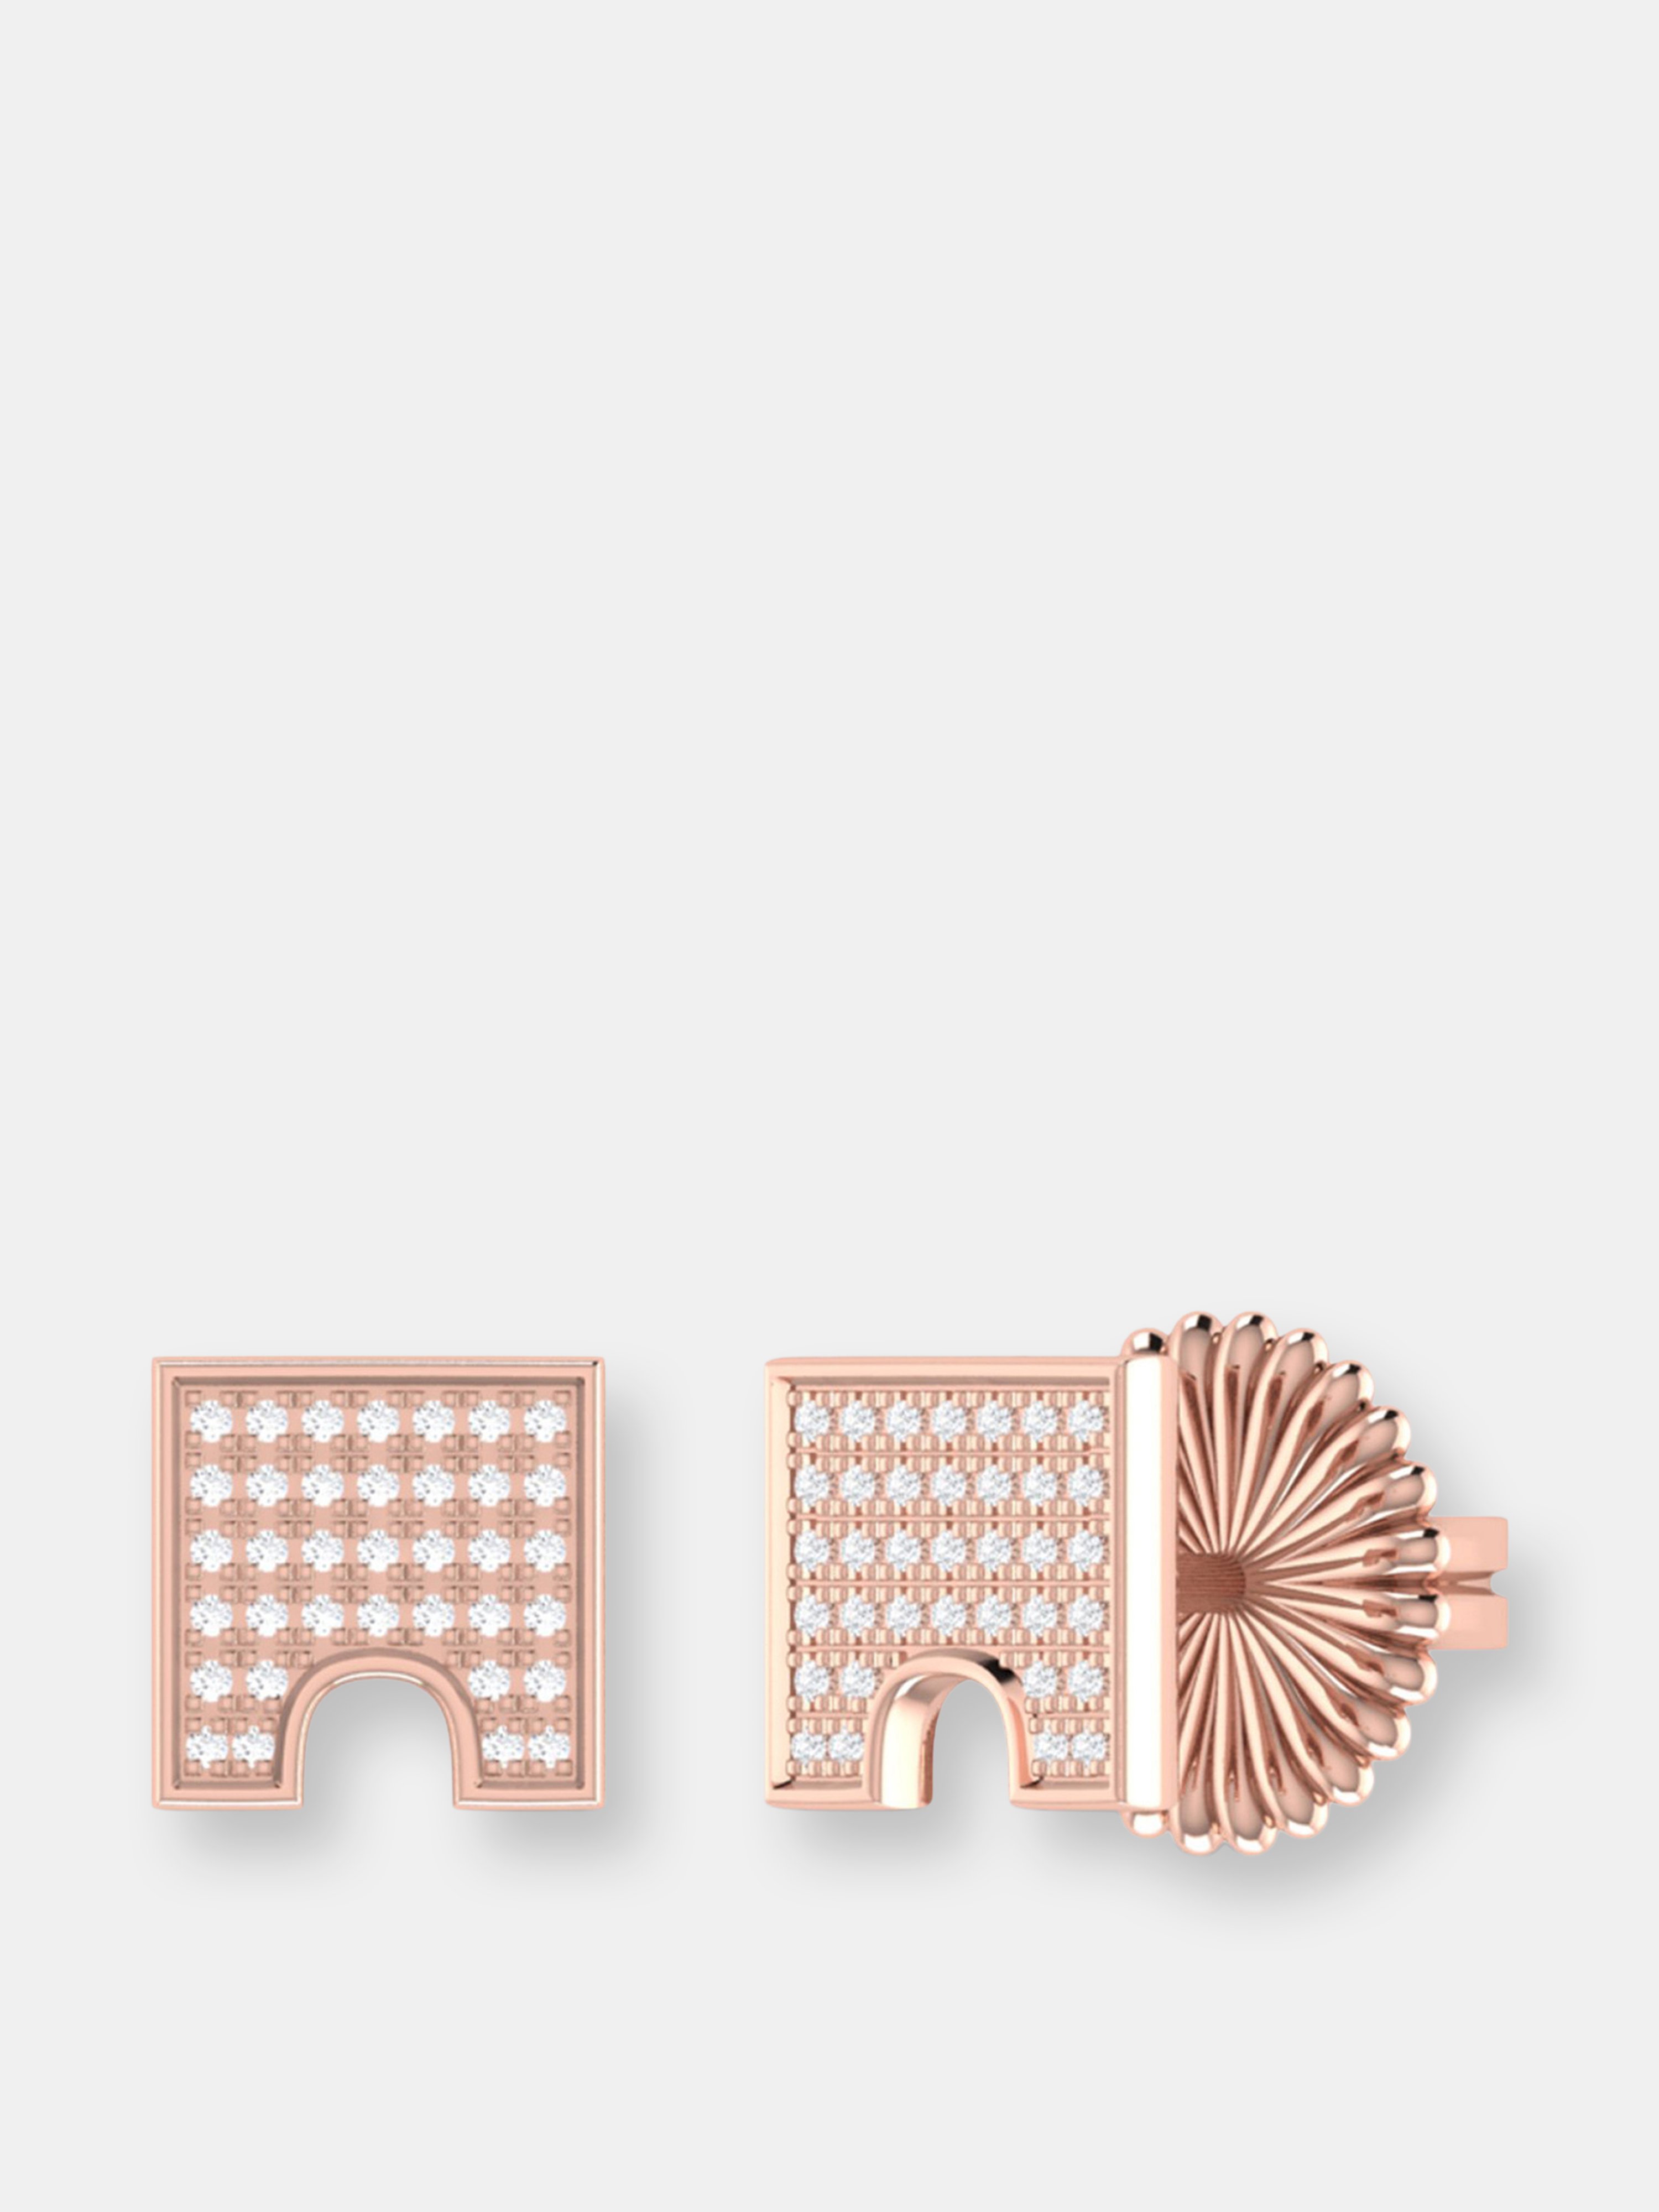 LUVMYJEWELRY LUVMYJEWELRY CITY ARCHES SQUARE DIAMOND STUD EARRINGS IN 14K ROSE GOLD VERMEIL ON STERLING SILVER